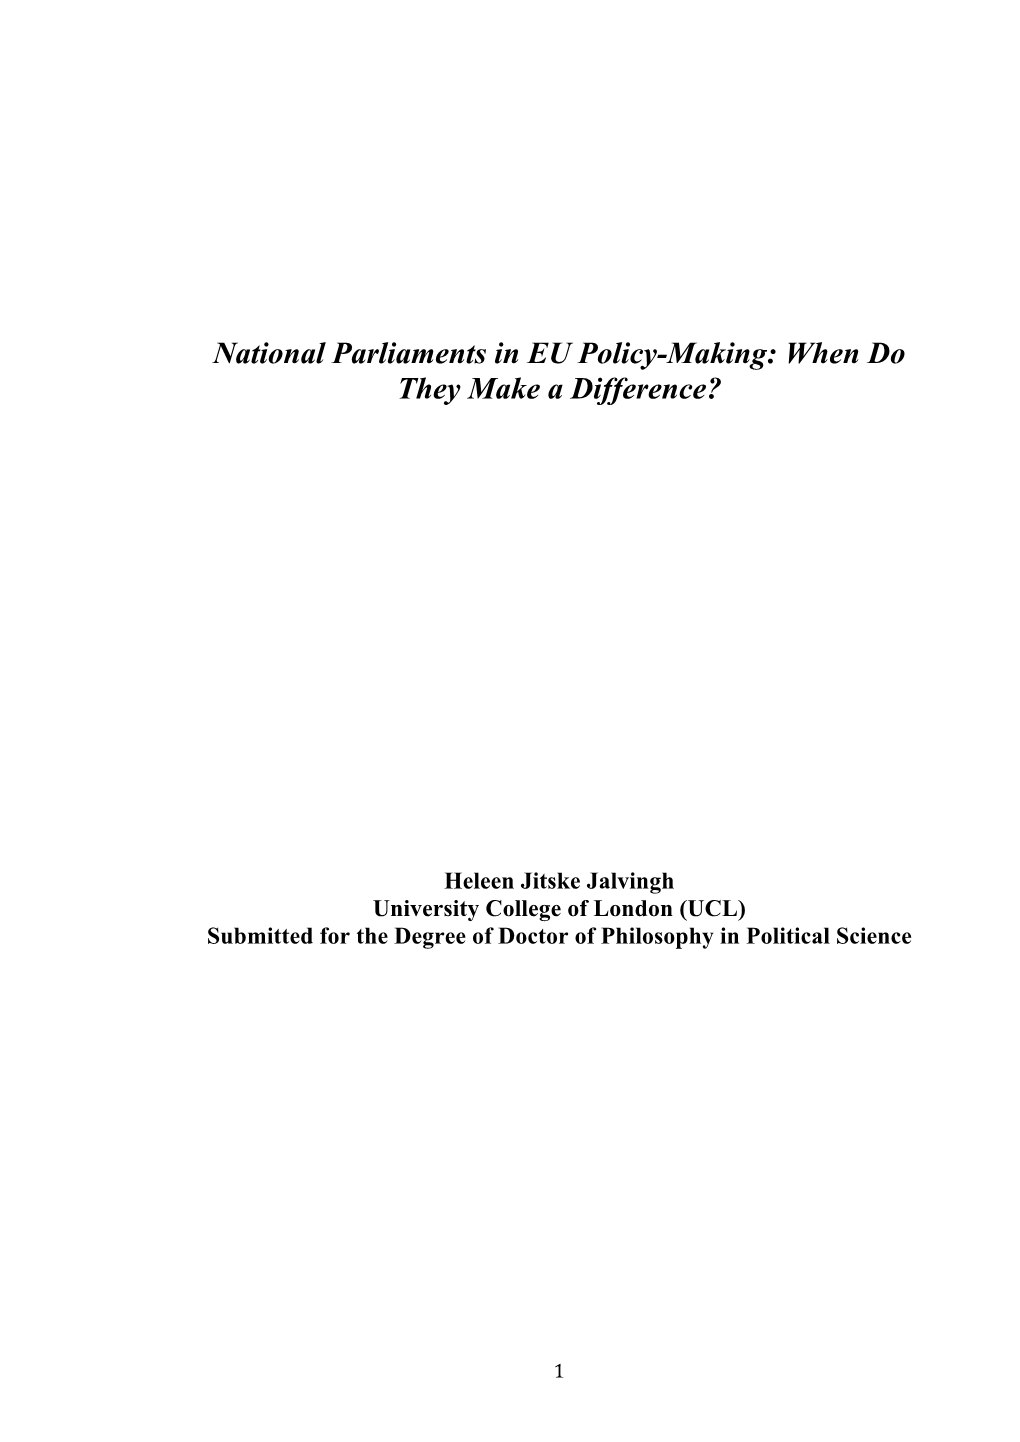 National Parliaments in EU Policy-Making: When Do They Make a Difference?